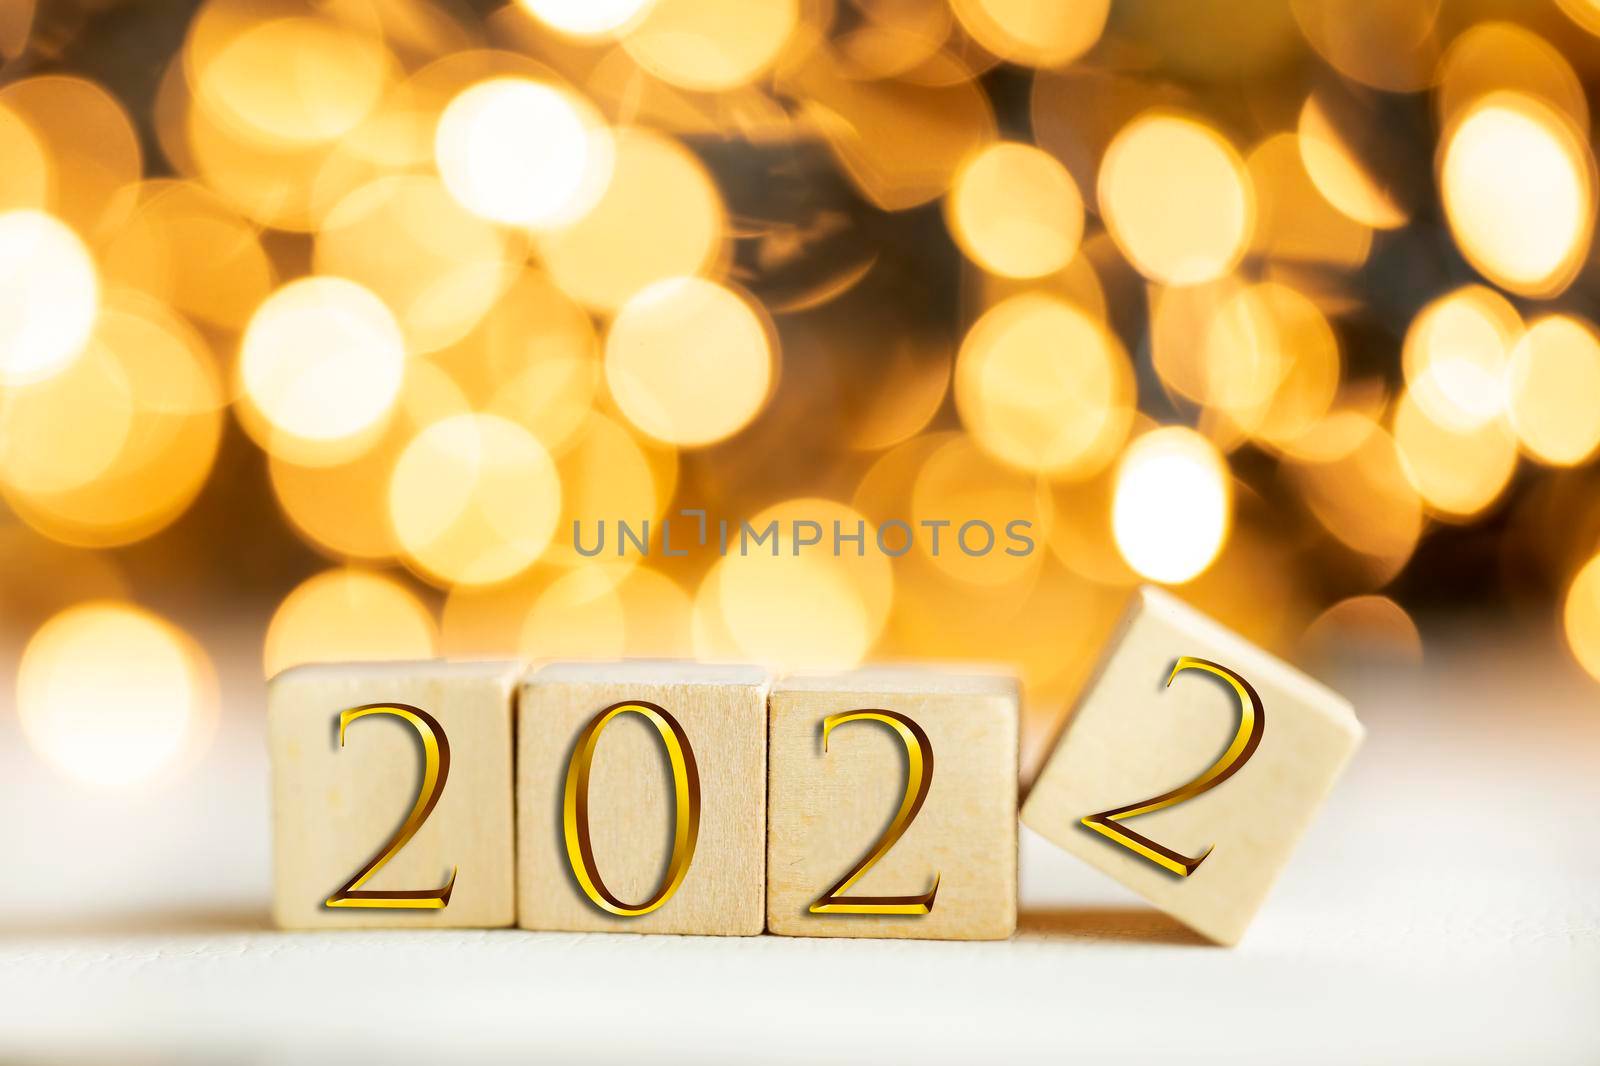 The year 2022 written on wooden cubes in gold luxury letters with shiny bokeh background, New Year celebration concept glitter beauty